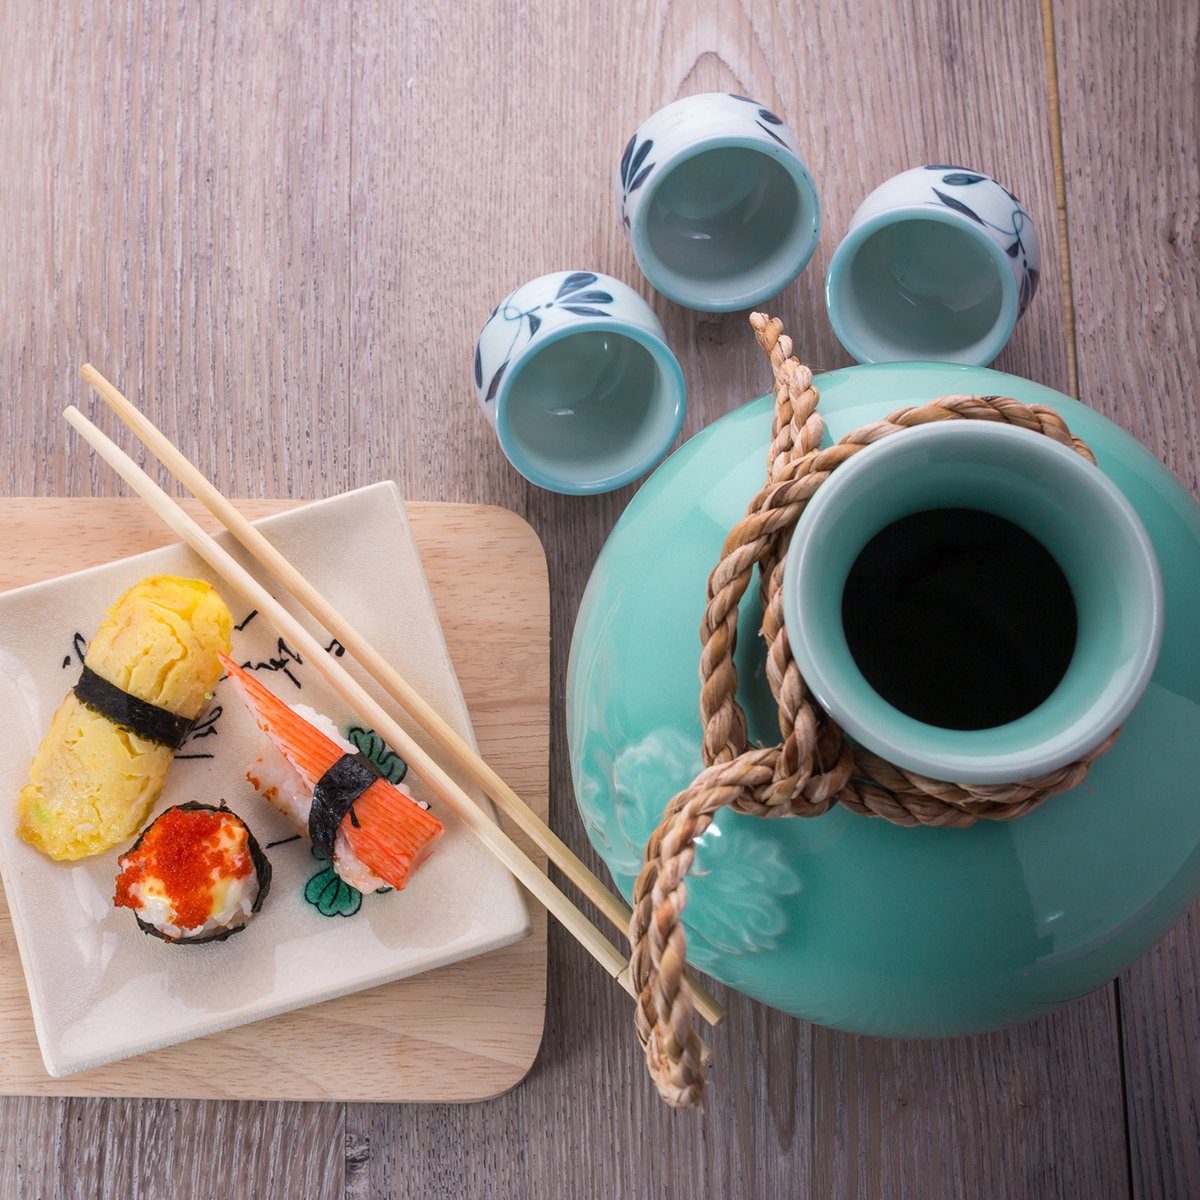 Sake & Sushi Tasting Event this October 18 @ 7:00 p.m. 🍶 A detailed tasting where you will be able to understand how Sake is made and the various quality levels. All paired with delicious Sushi 🍣 Learn more about this tasting >> ow.ly/JHJz30lfcRL